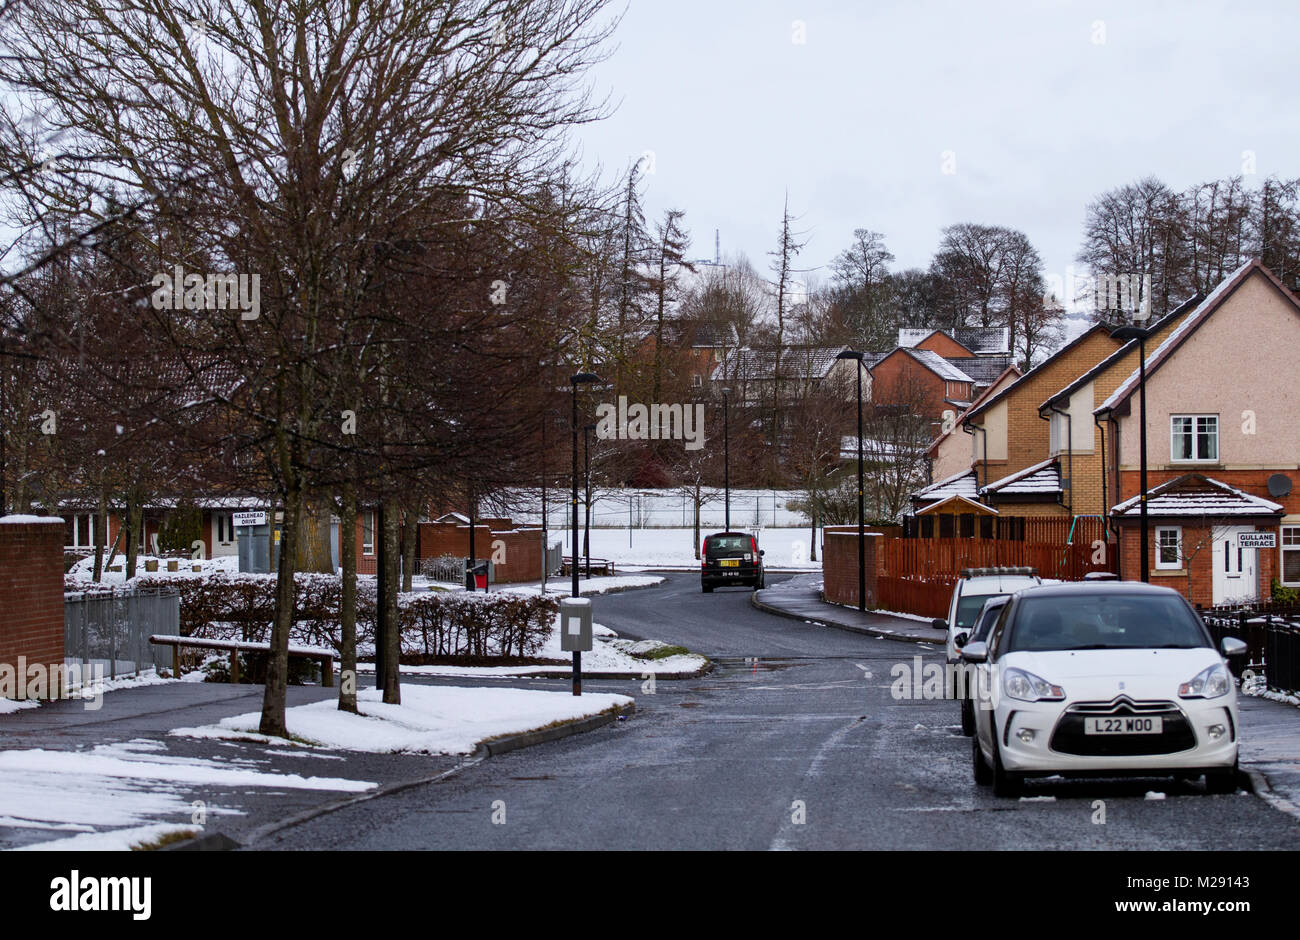 Dundee, Scotland, UK. 6th February, 2018. UK weather: Freezing temperatures brings overnight snow across North East Scotland. Snow covered Ardler Village housing Estate in Dundee, UK: Credits: Dundee Photographics/Alamy Live News Stock Photo